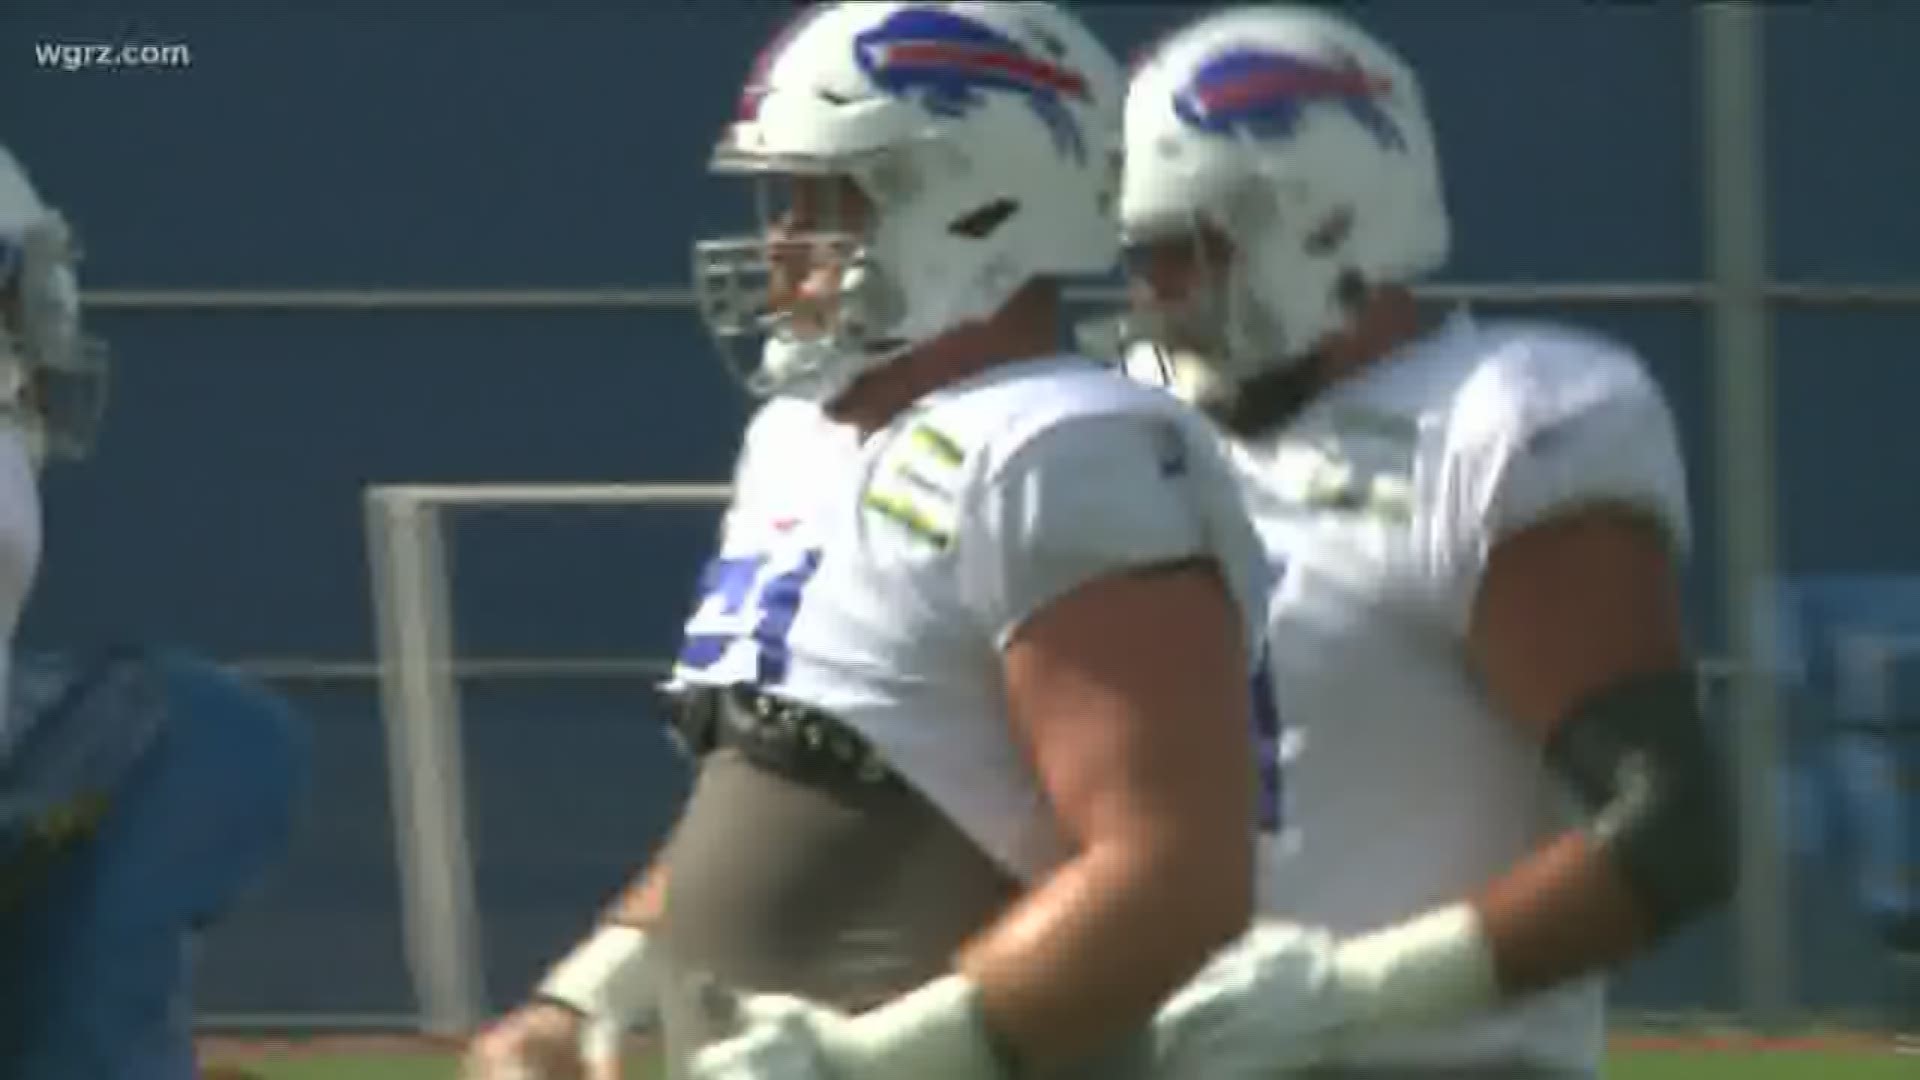 Bills welcome new faces and prepare for Carolina